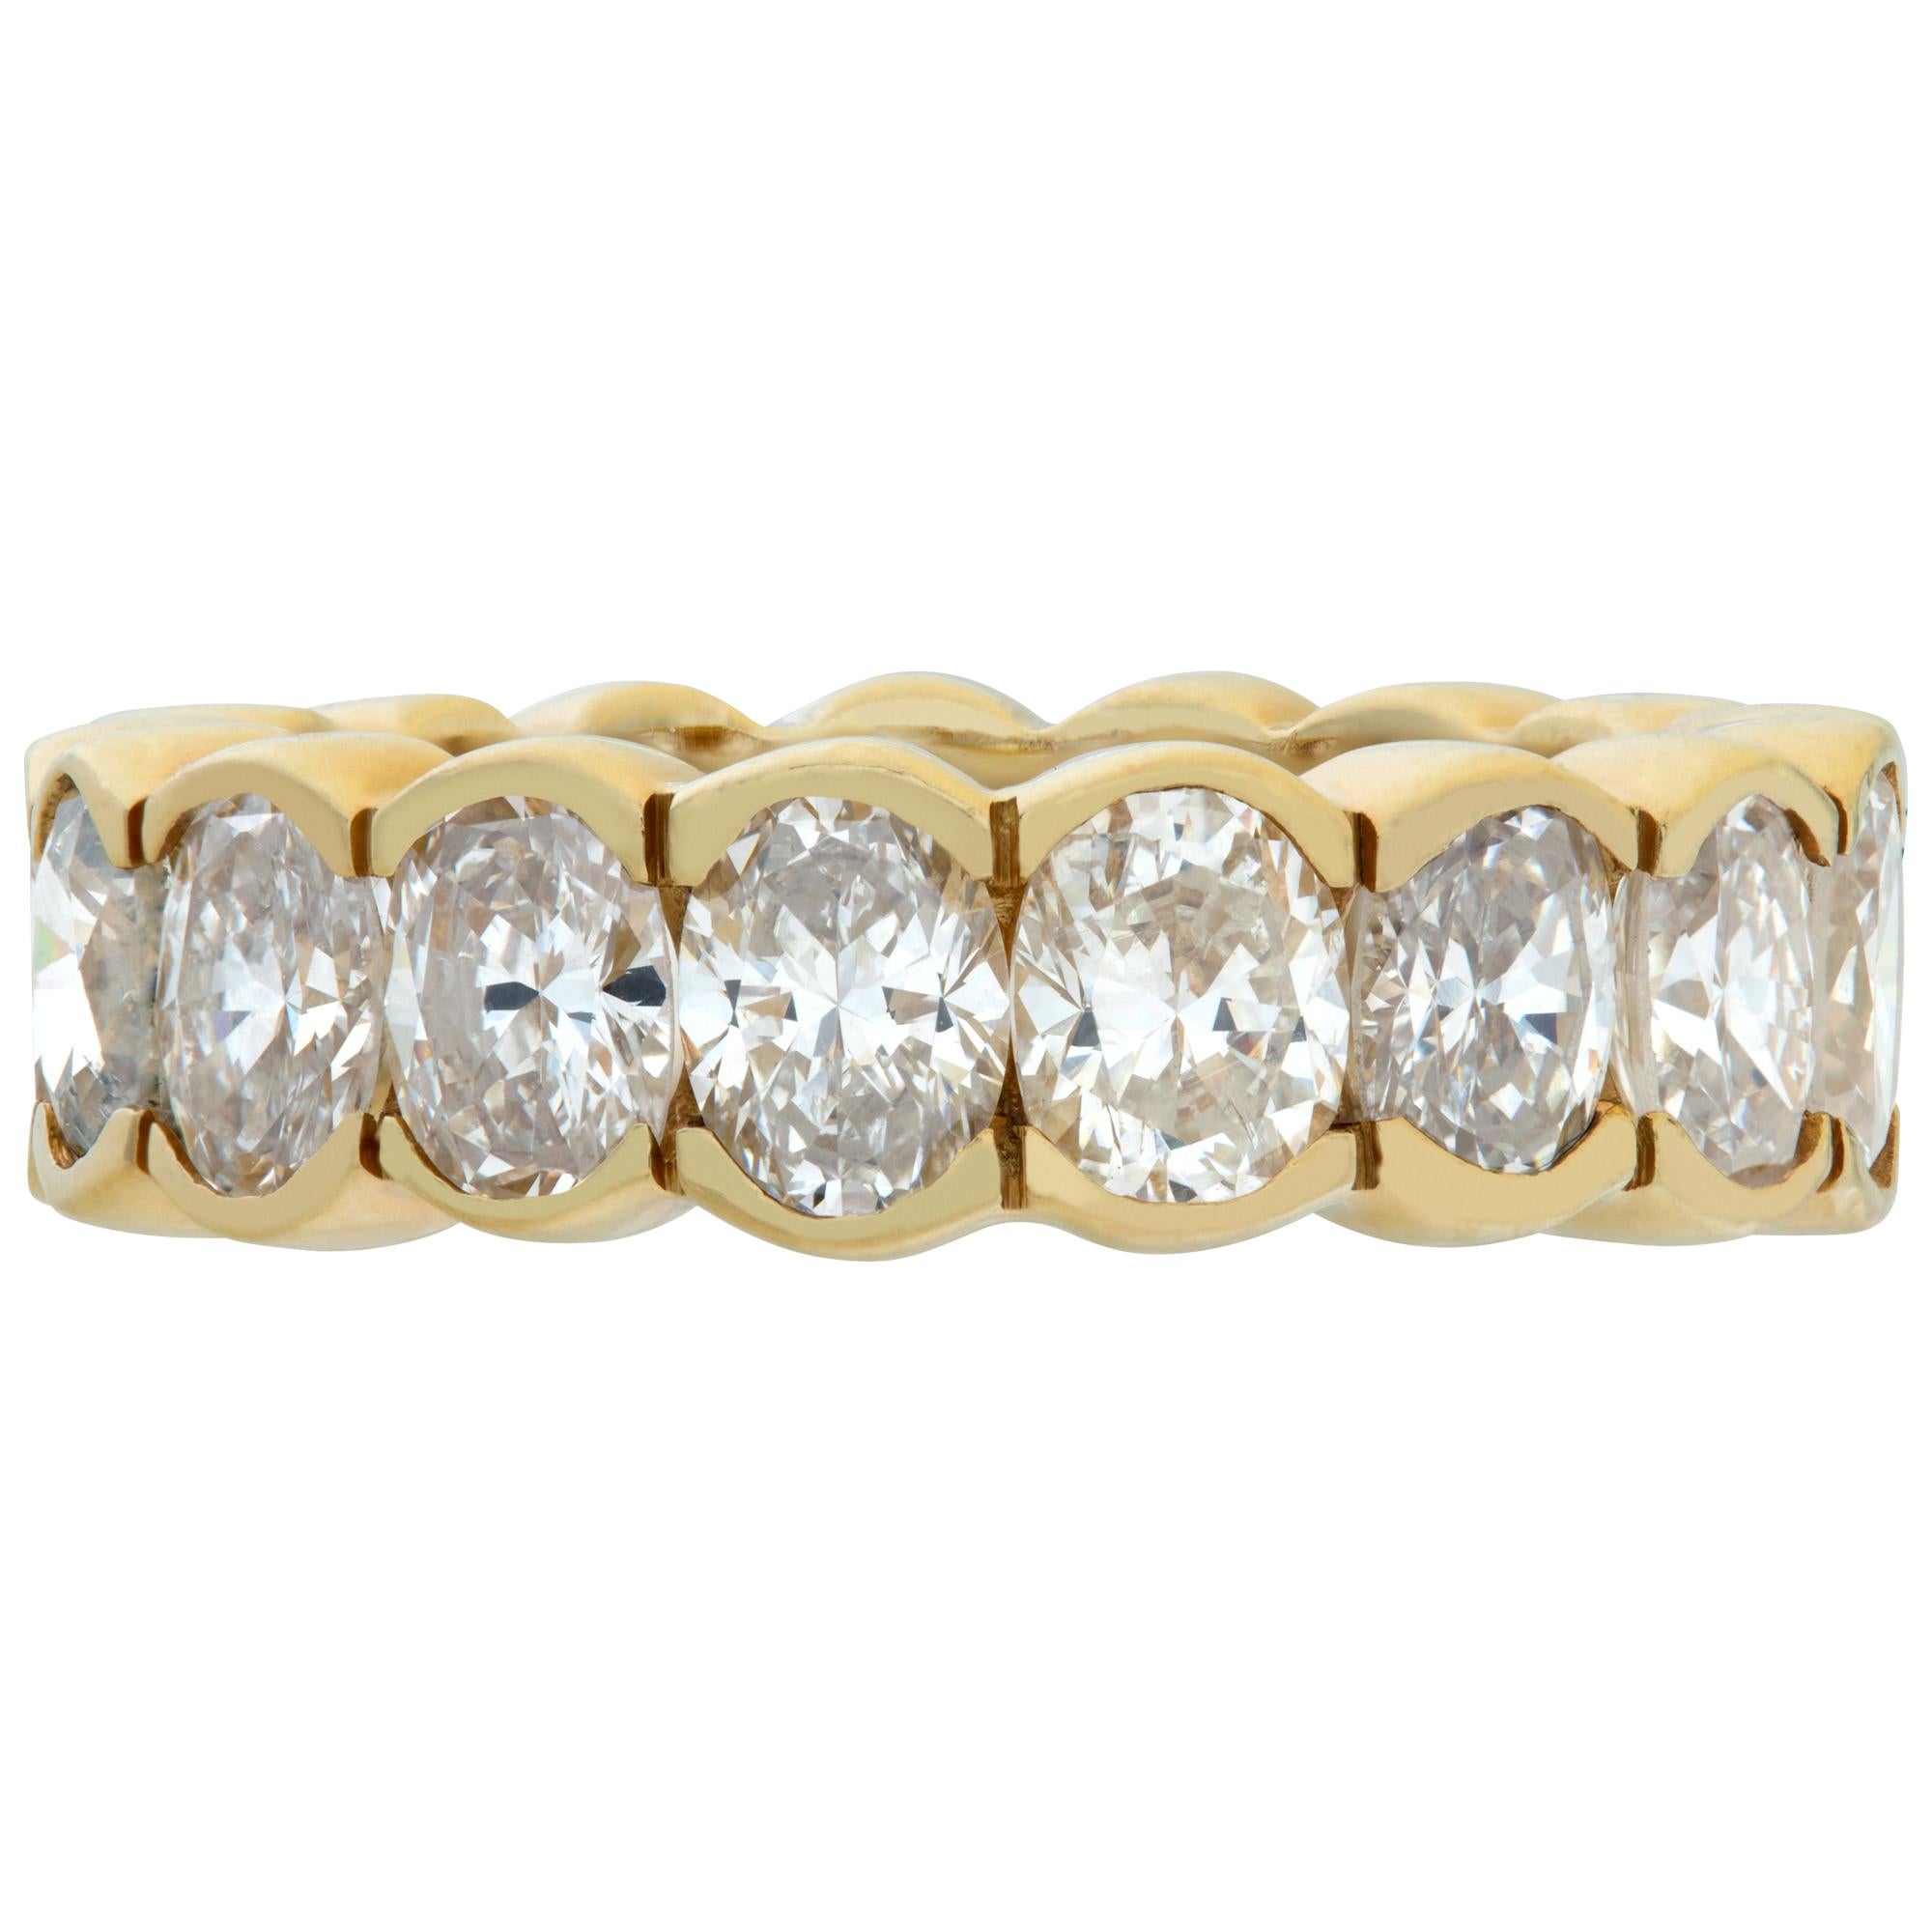 Oval diamonds cut eternity band set in 18K yellow gold, total oval brilliant cut diamonds approximately 4.00 carats, estimate G-H color, VS-SI clarity. Size 5, width 5.5mm.This Eternity Band ring is currently size 4.75 and some items can be sized up